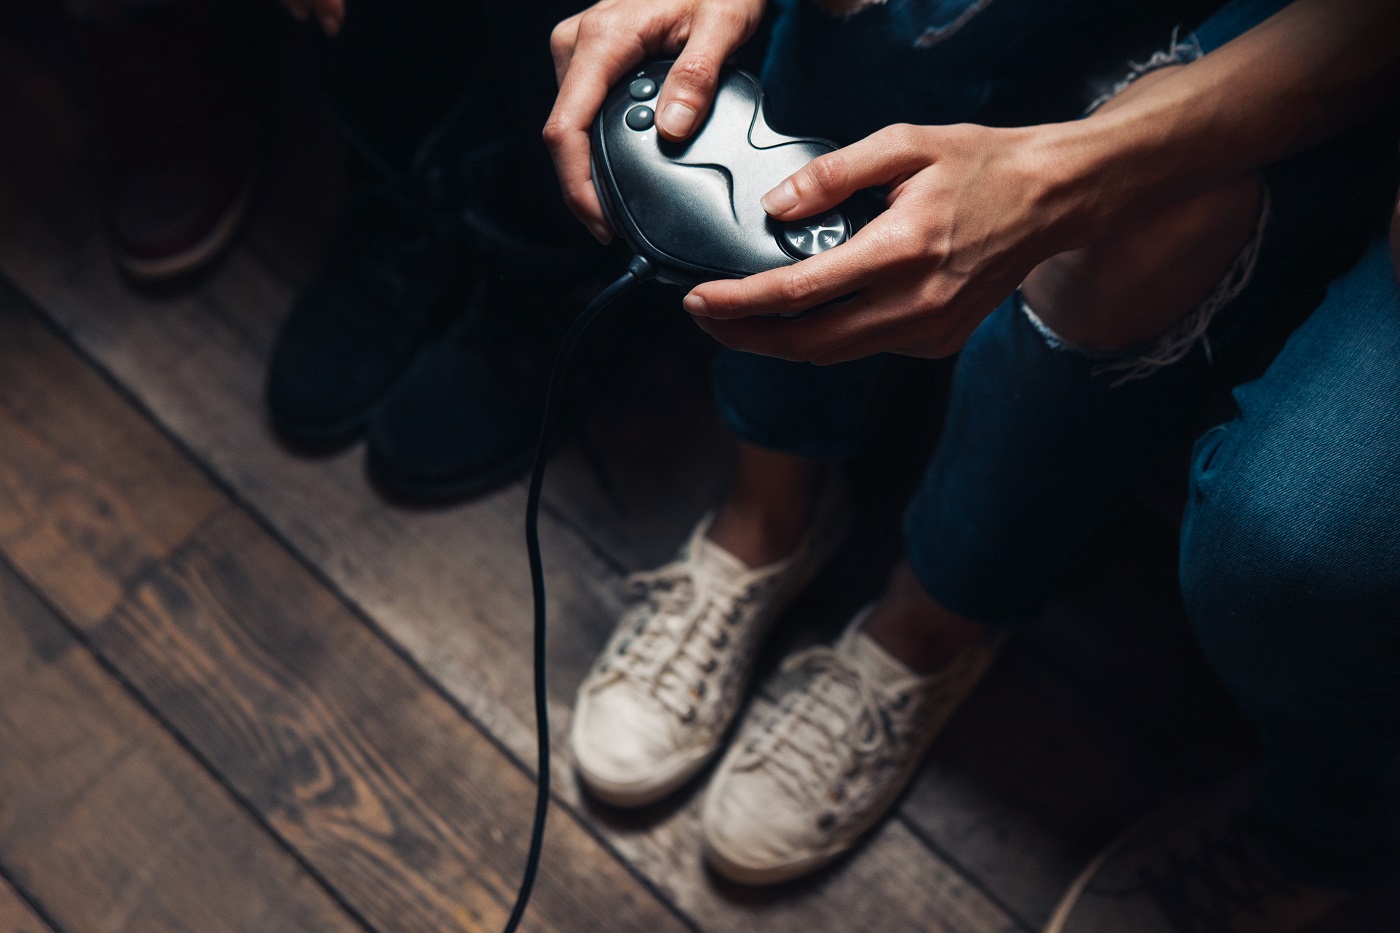 Video game addiction, psychological disorder excessive play, everyday unhealthy lifestyle. Closeup view of unrecognizable person hands with joystick.